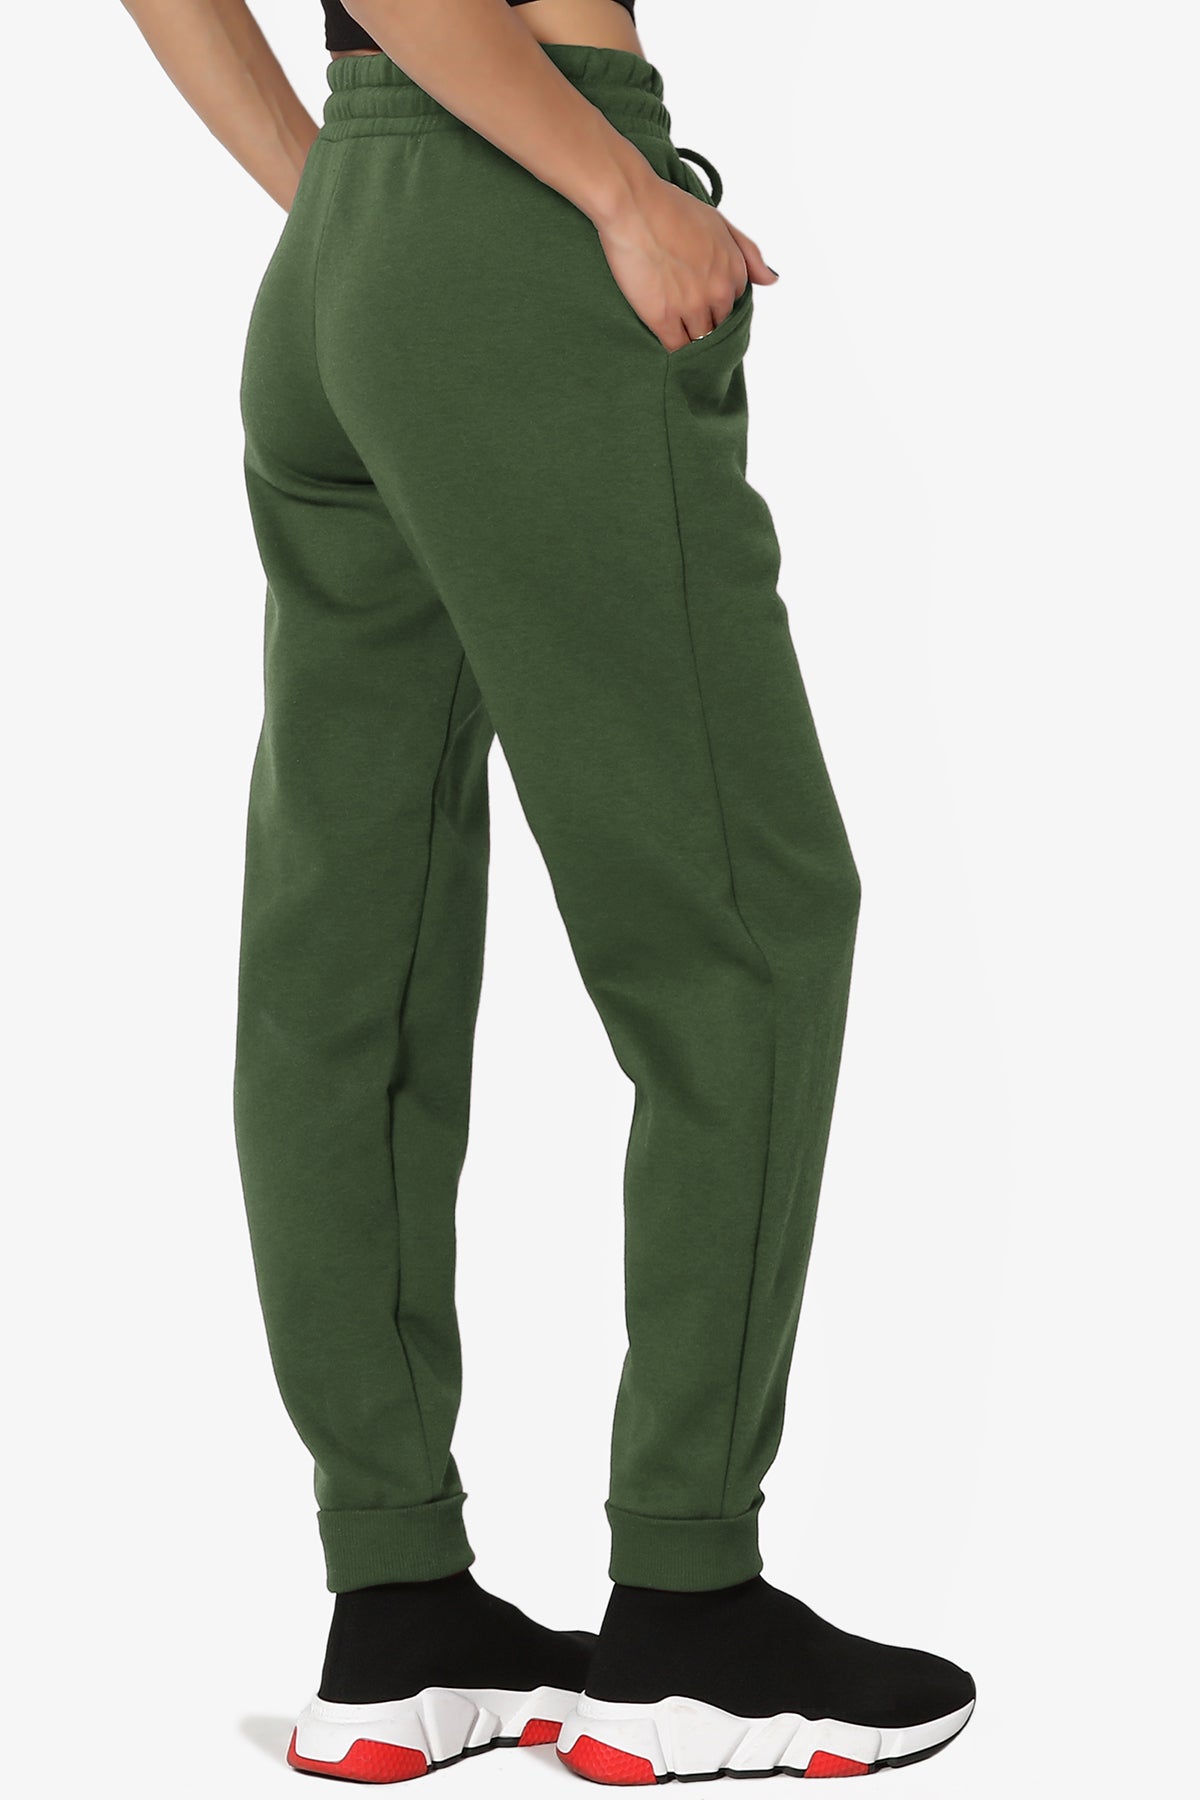 Powerblend, Fleece, Warm And Comfortable Joggers For Women, 29 (Plus, Happy  Spring Green Script, Small